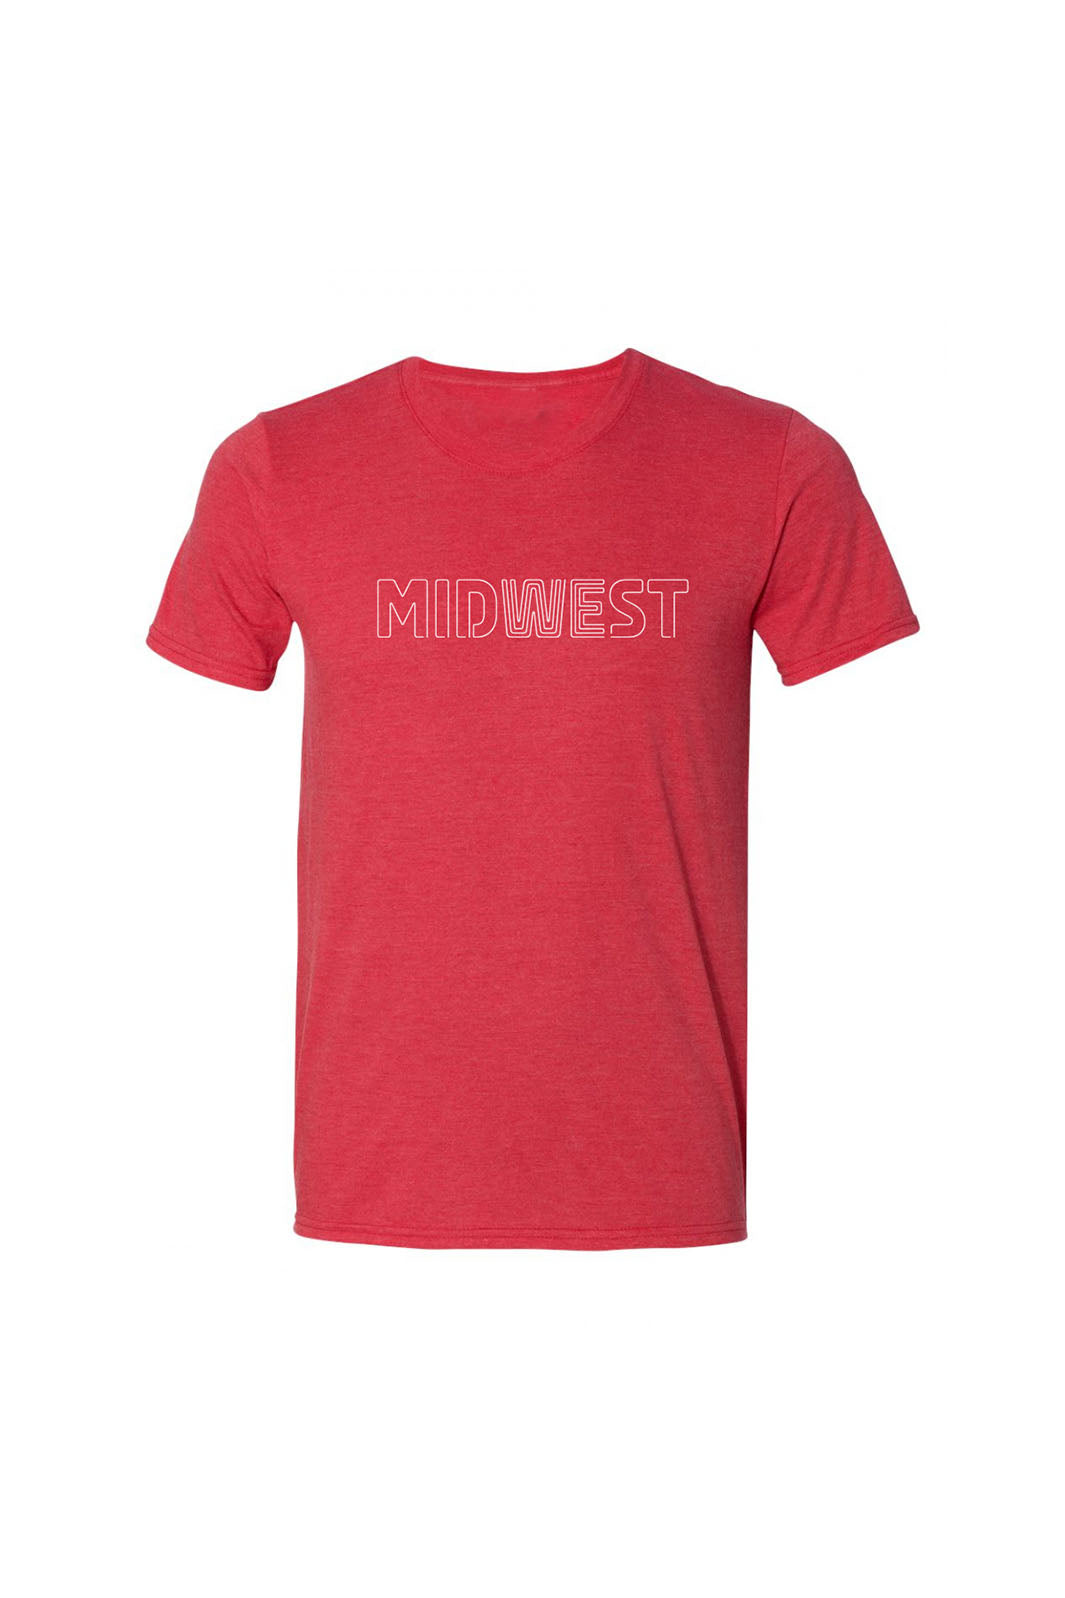 Midwest T-Shirt - Red